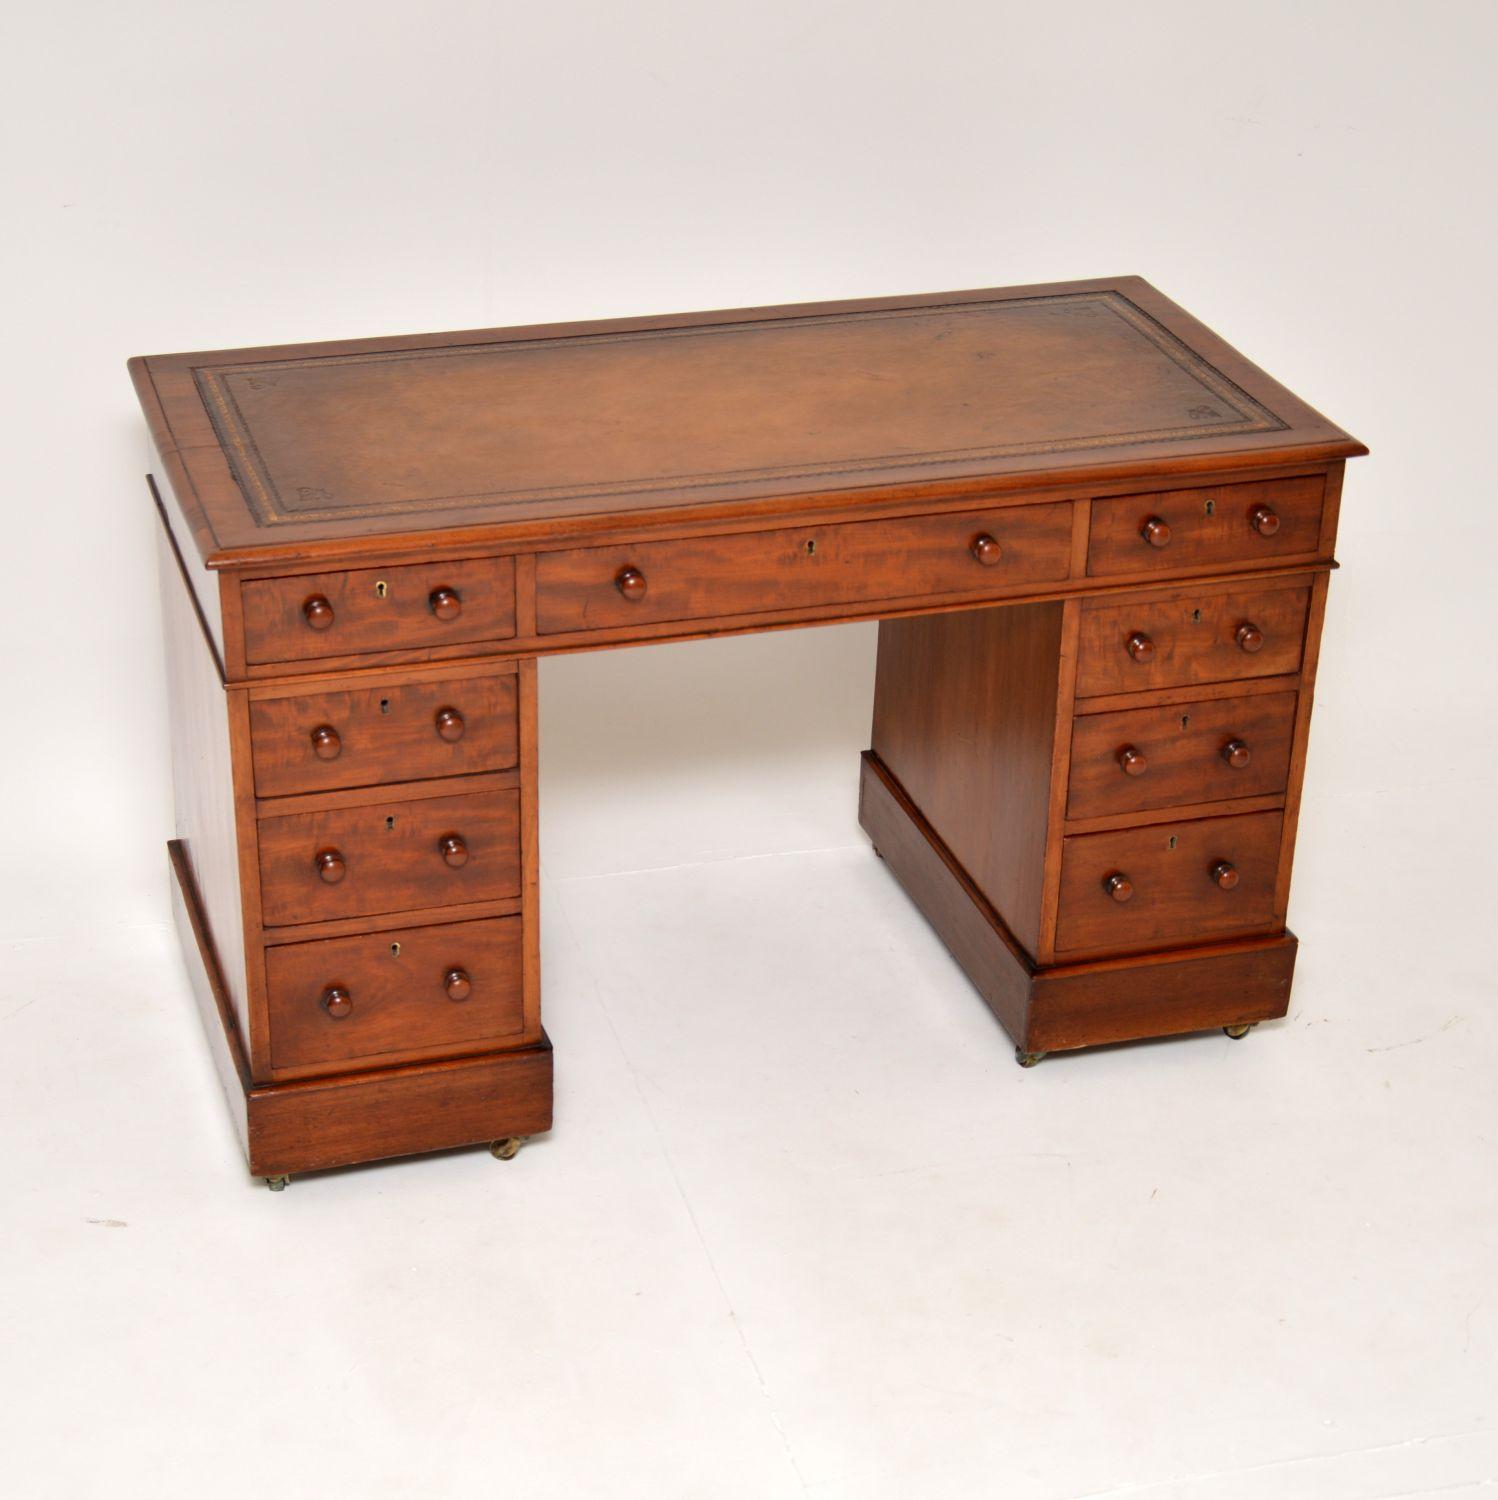 A charming antique Victorian period pedestal desk. This was made in England, it dates from around the 1860-80’s.

It is a useful size, quite compact for a pedestal desk, yet still offering ample work space and quite a wide knee hole space. The top